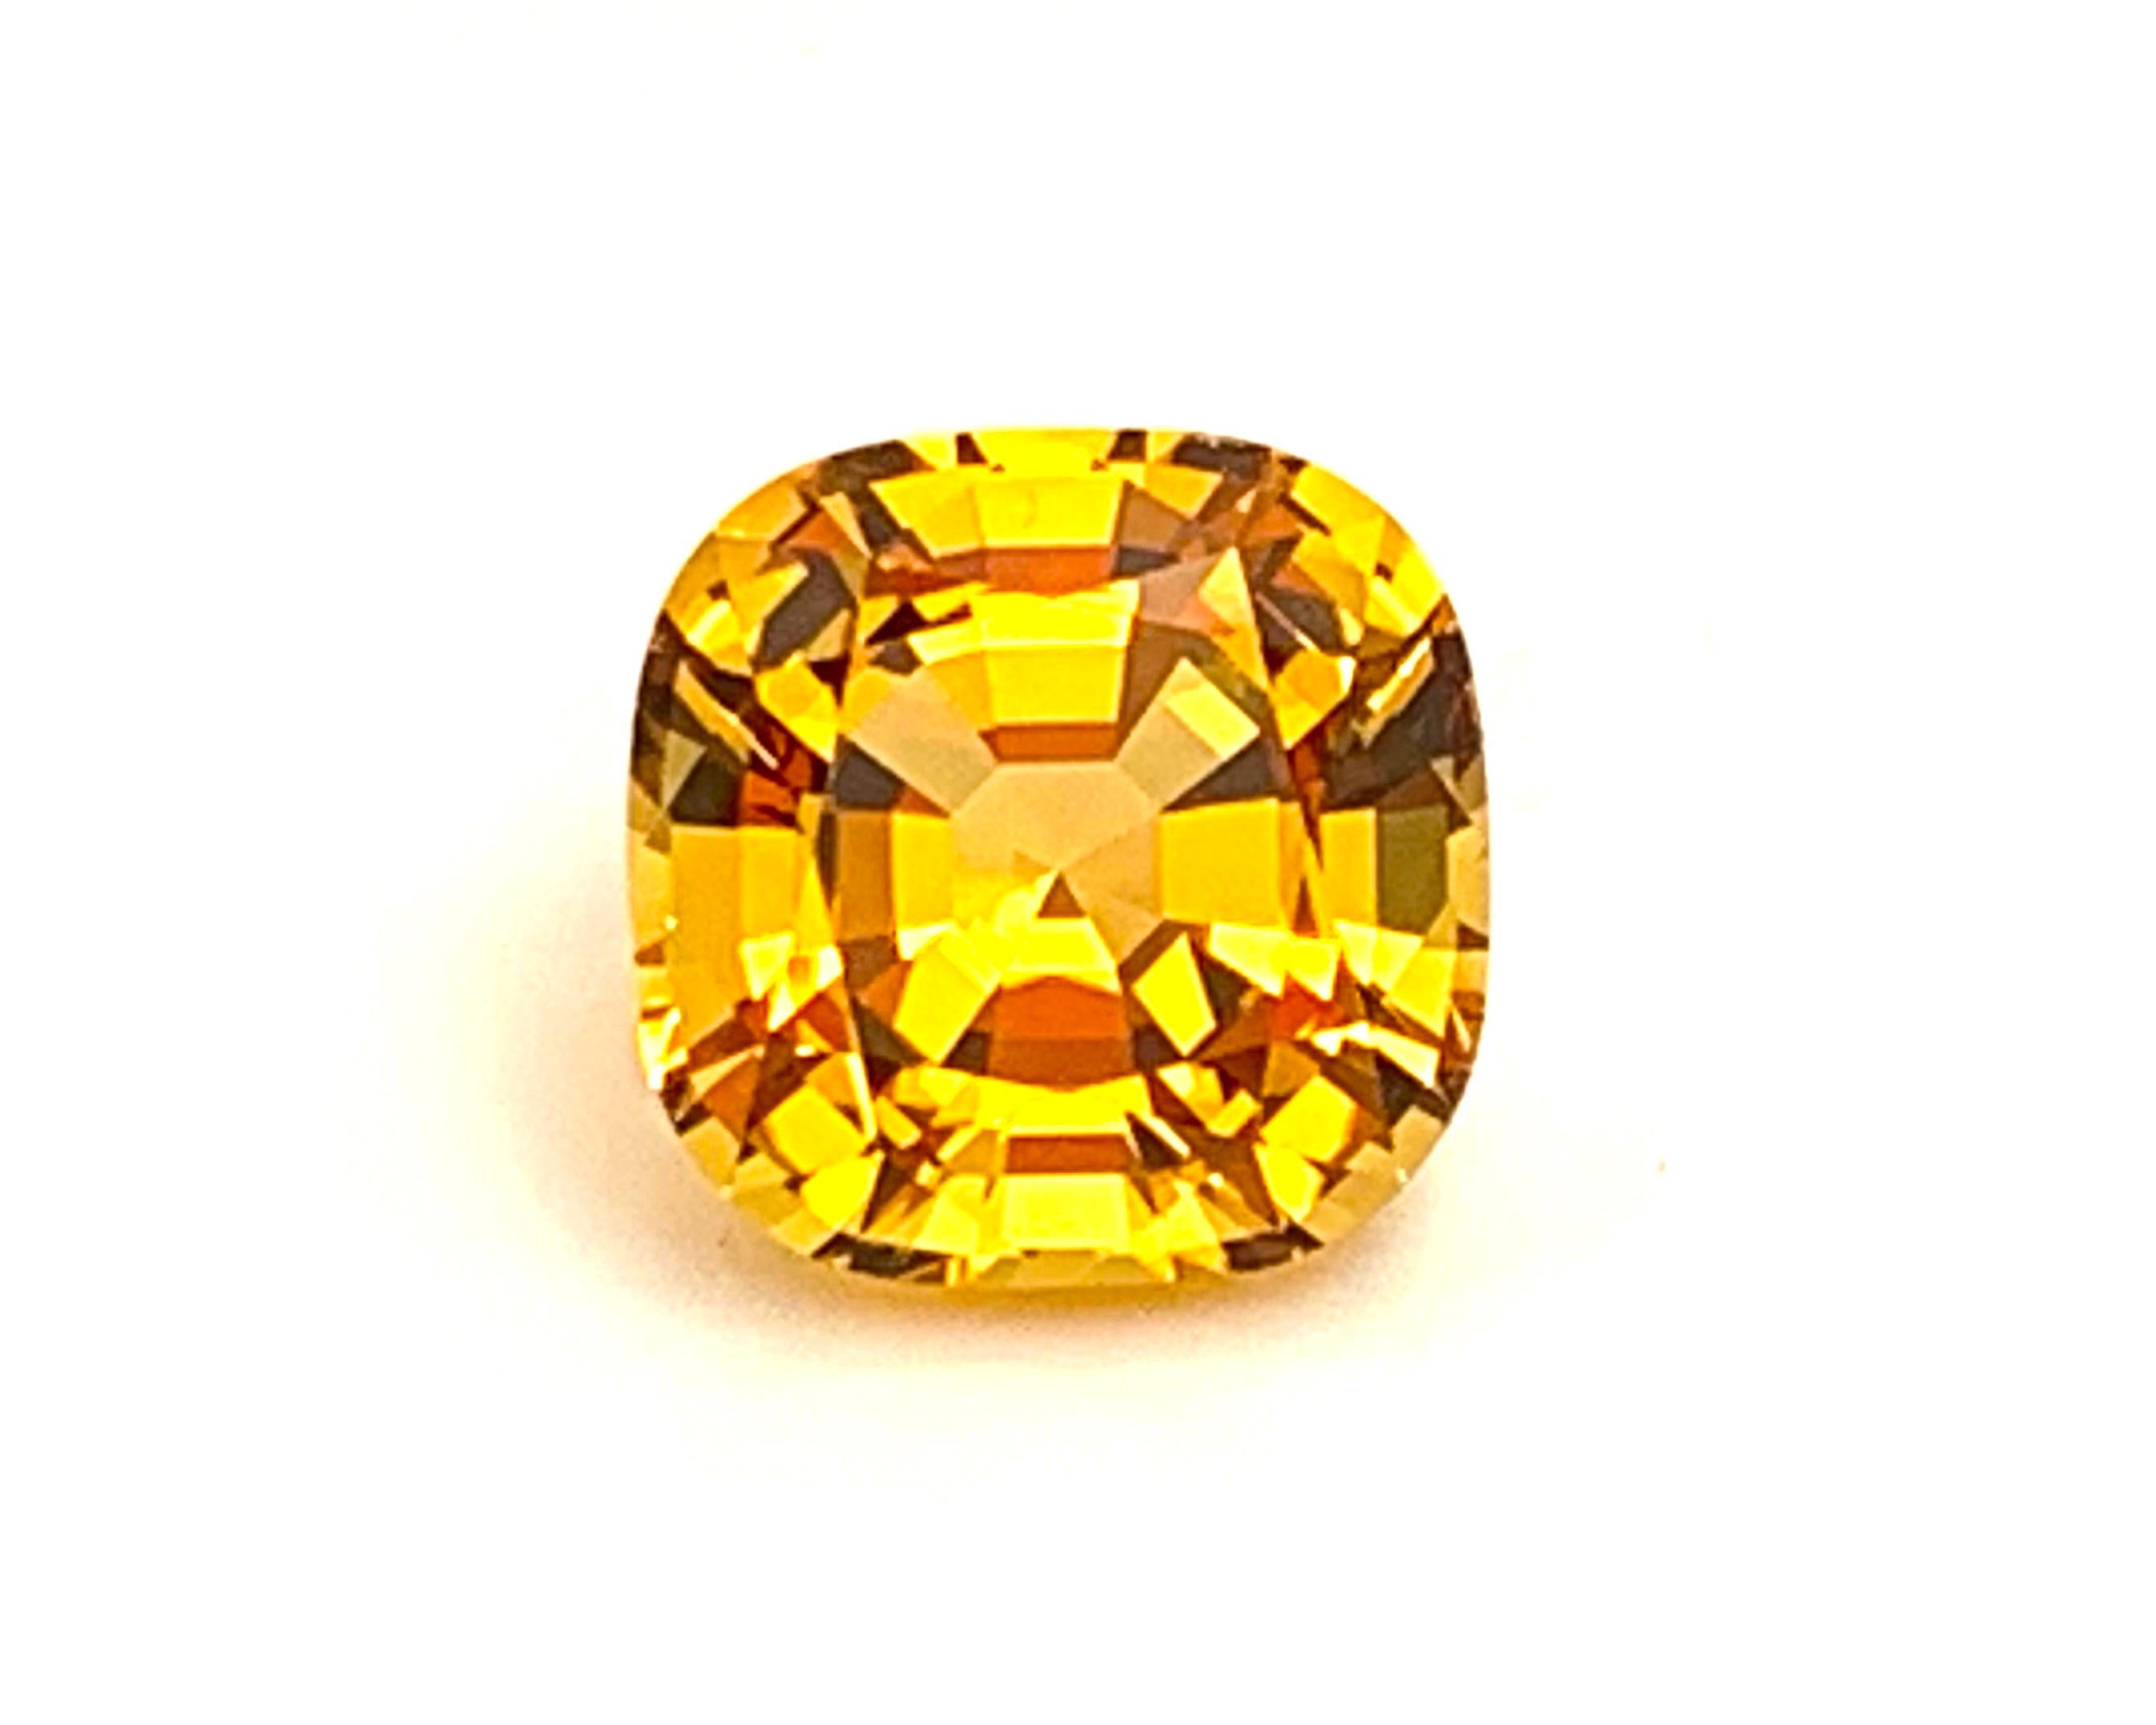 This warm, golden precious topaz weighs 22.38 carats, has exceptional clarity, and would make an absolutely stunning pendant enhancer or impressive centerpiece for a gemstone collection. It is a strikingly brilliant stone with golden honey color,